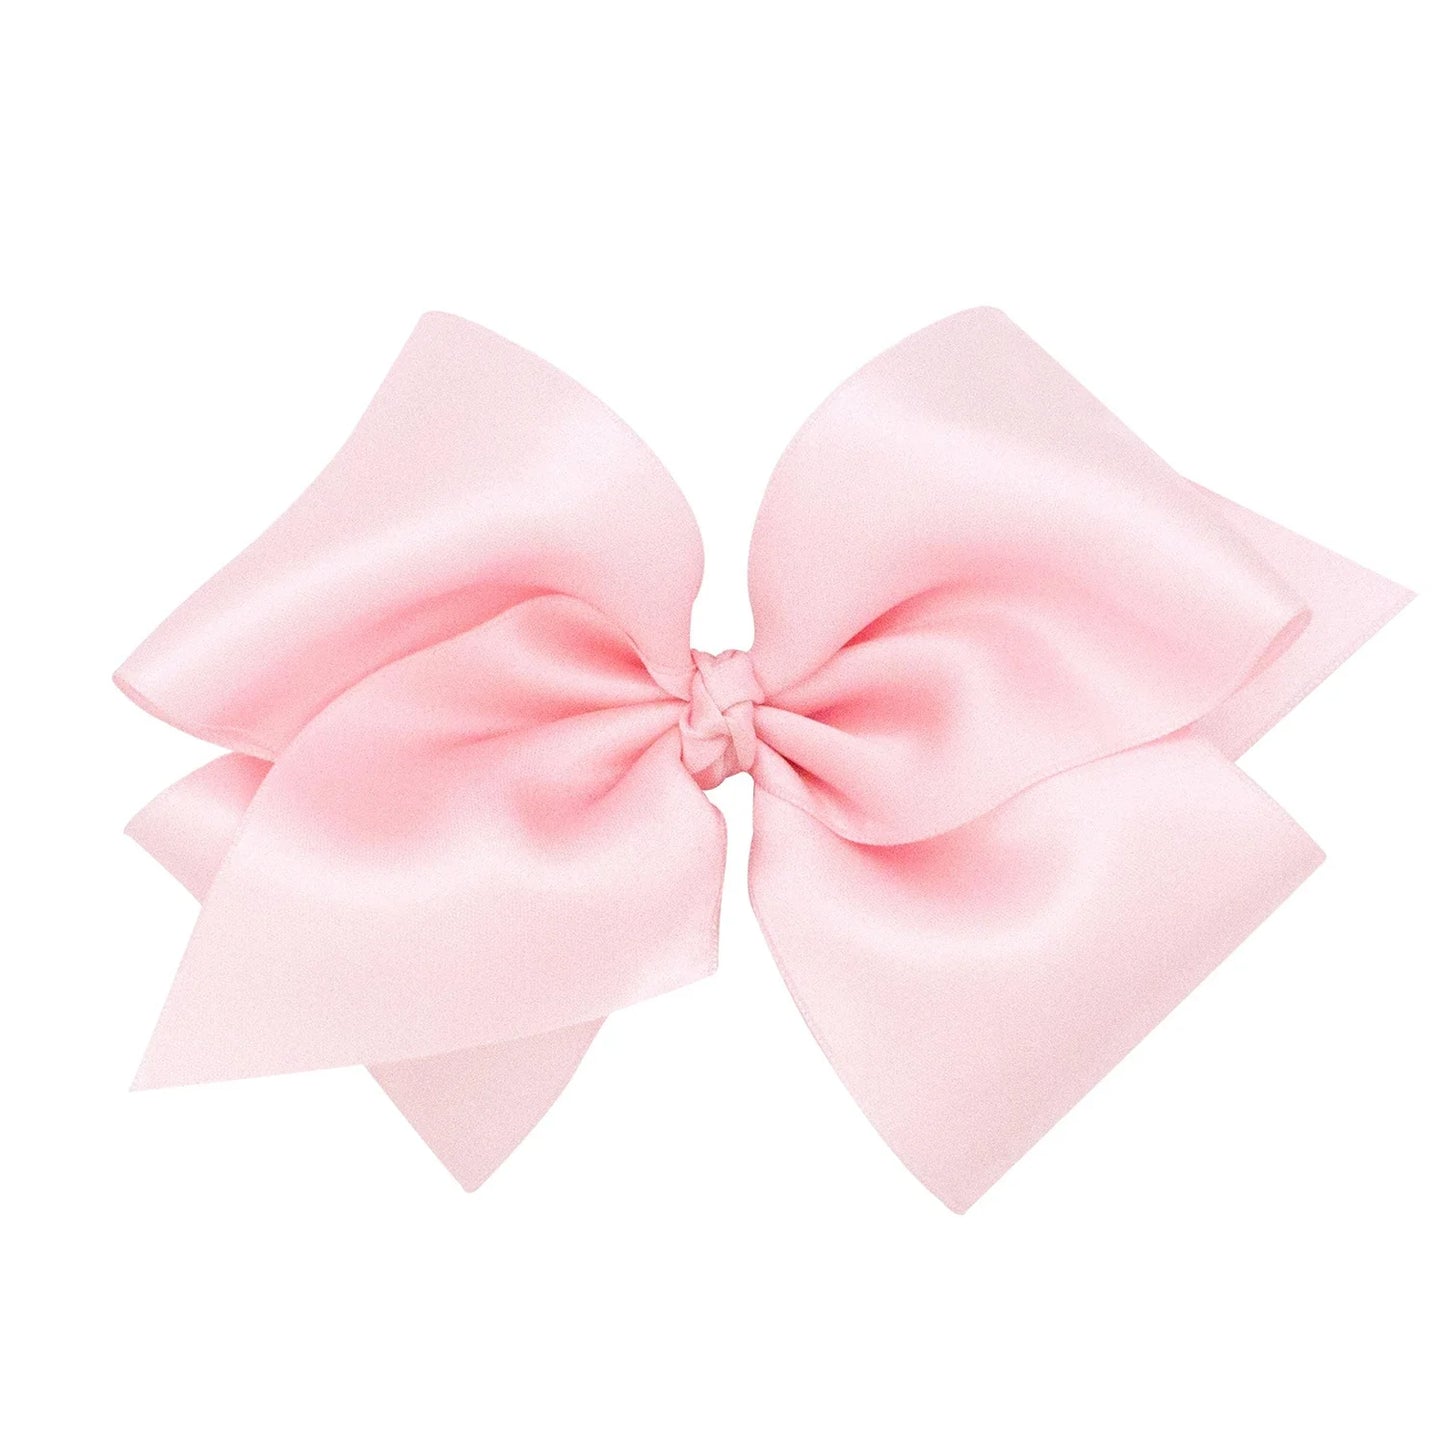 Wee Ones Medium French Satin Basic Bow w/Knot (3 color options)